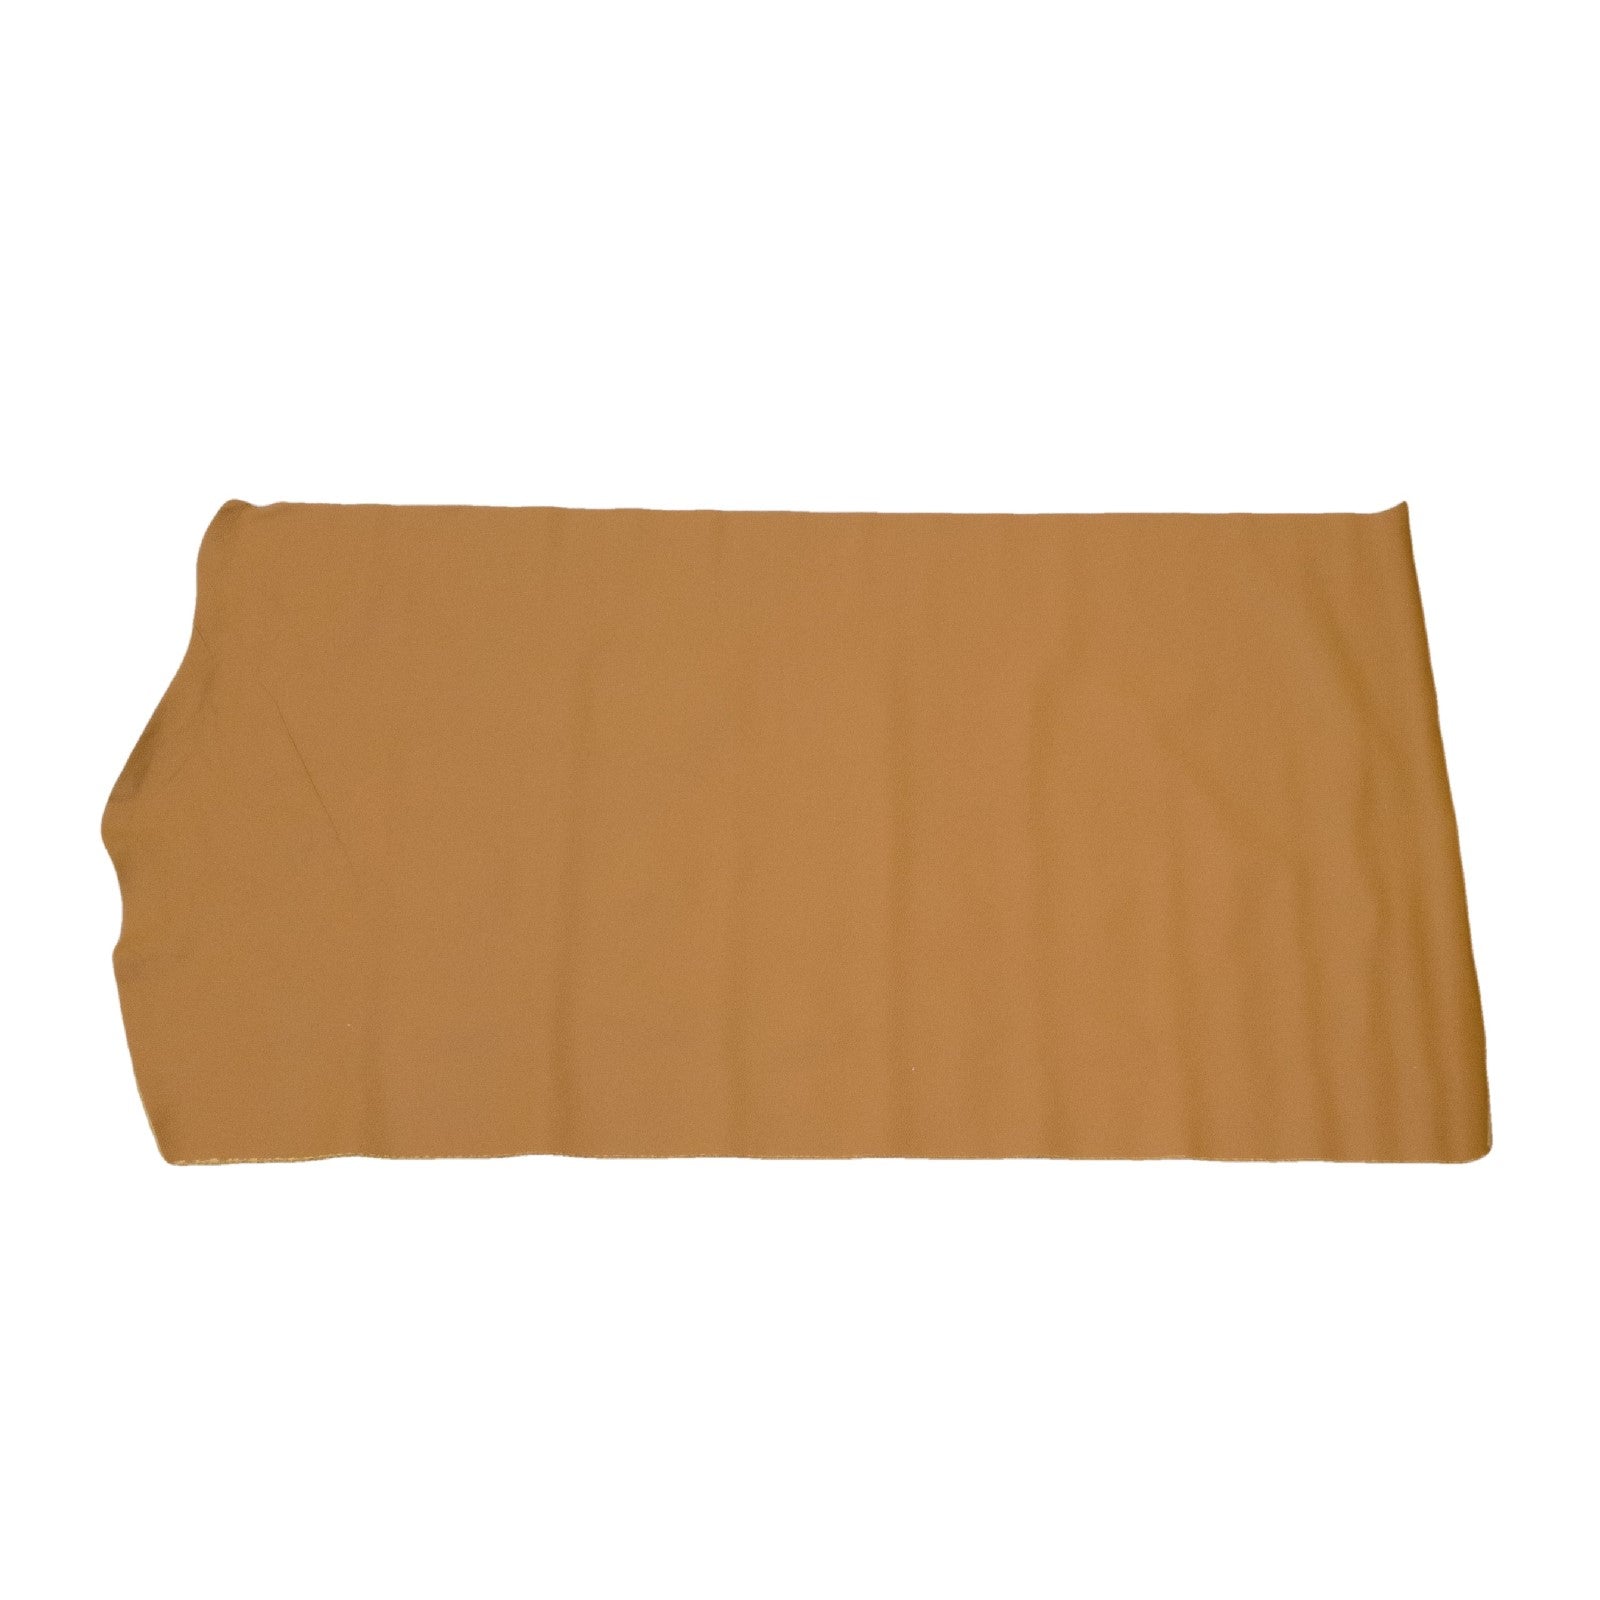 Sweet Caramel, 5.5-23 Sq Ft, 2.5-3 oz Cow Hides, Vital Upholstery Collection, 5.5-6.5 / Project Piece (Middle) | The Leather Guy